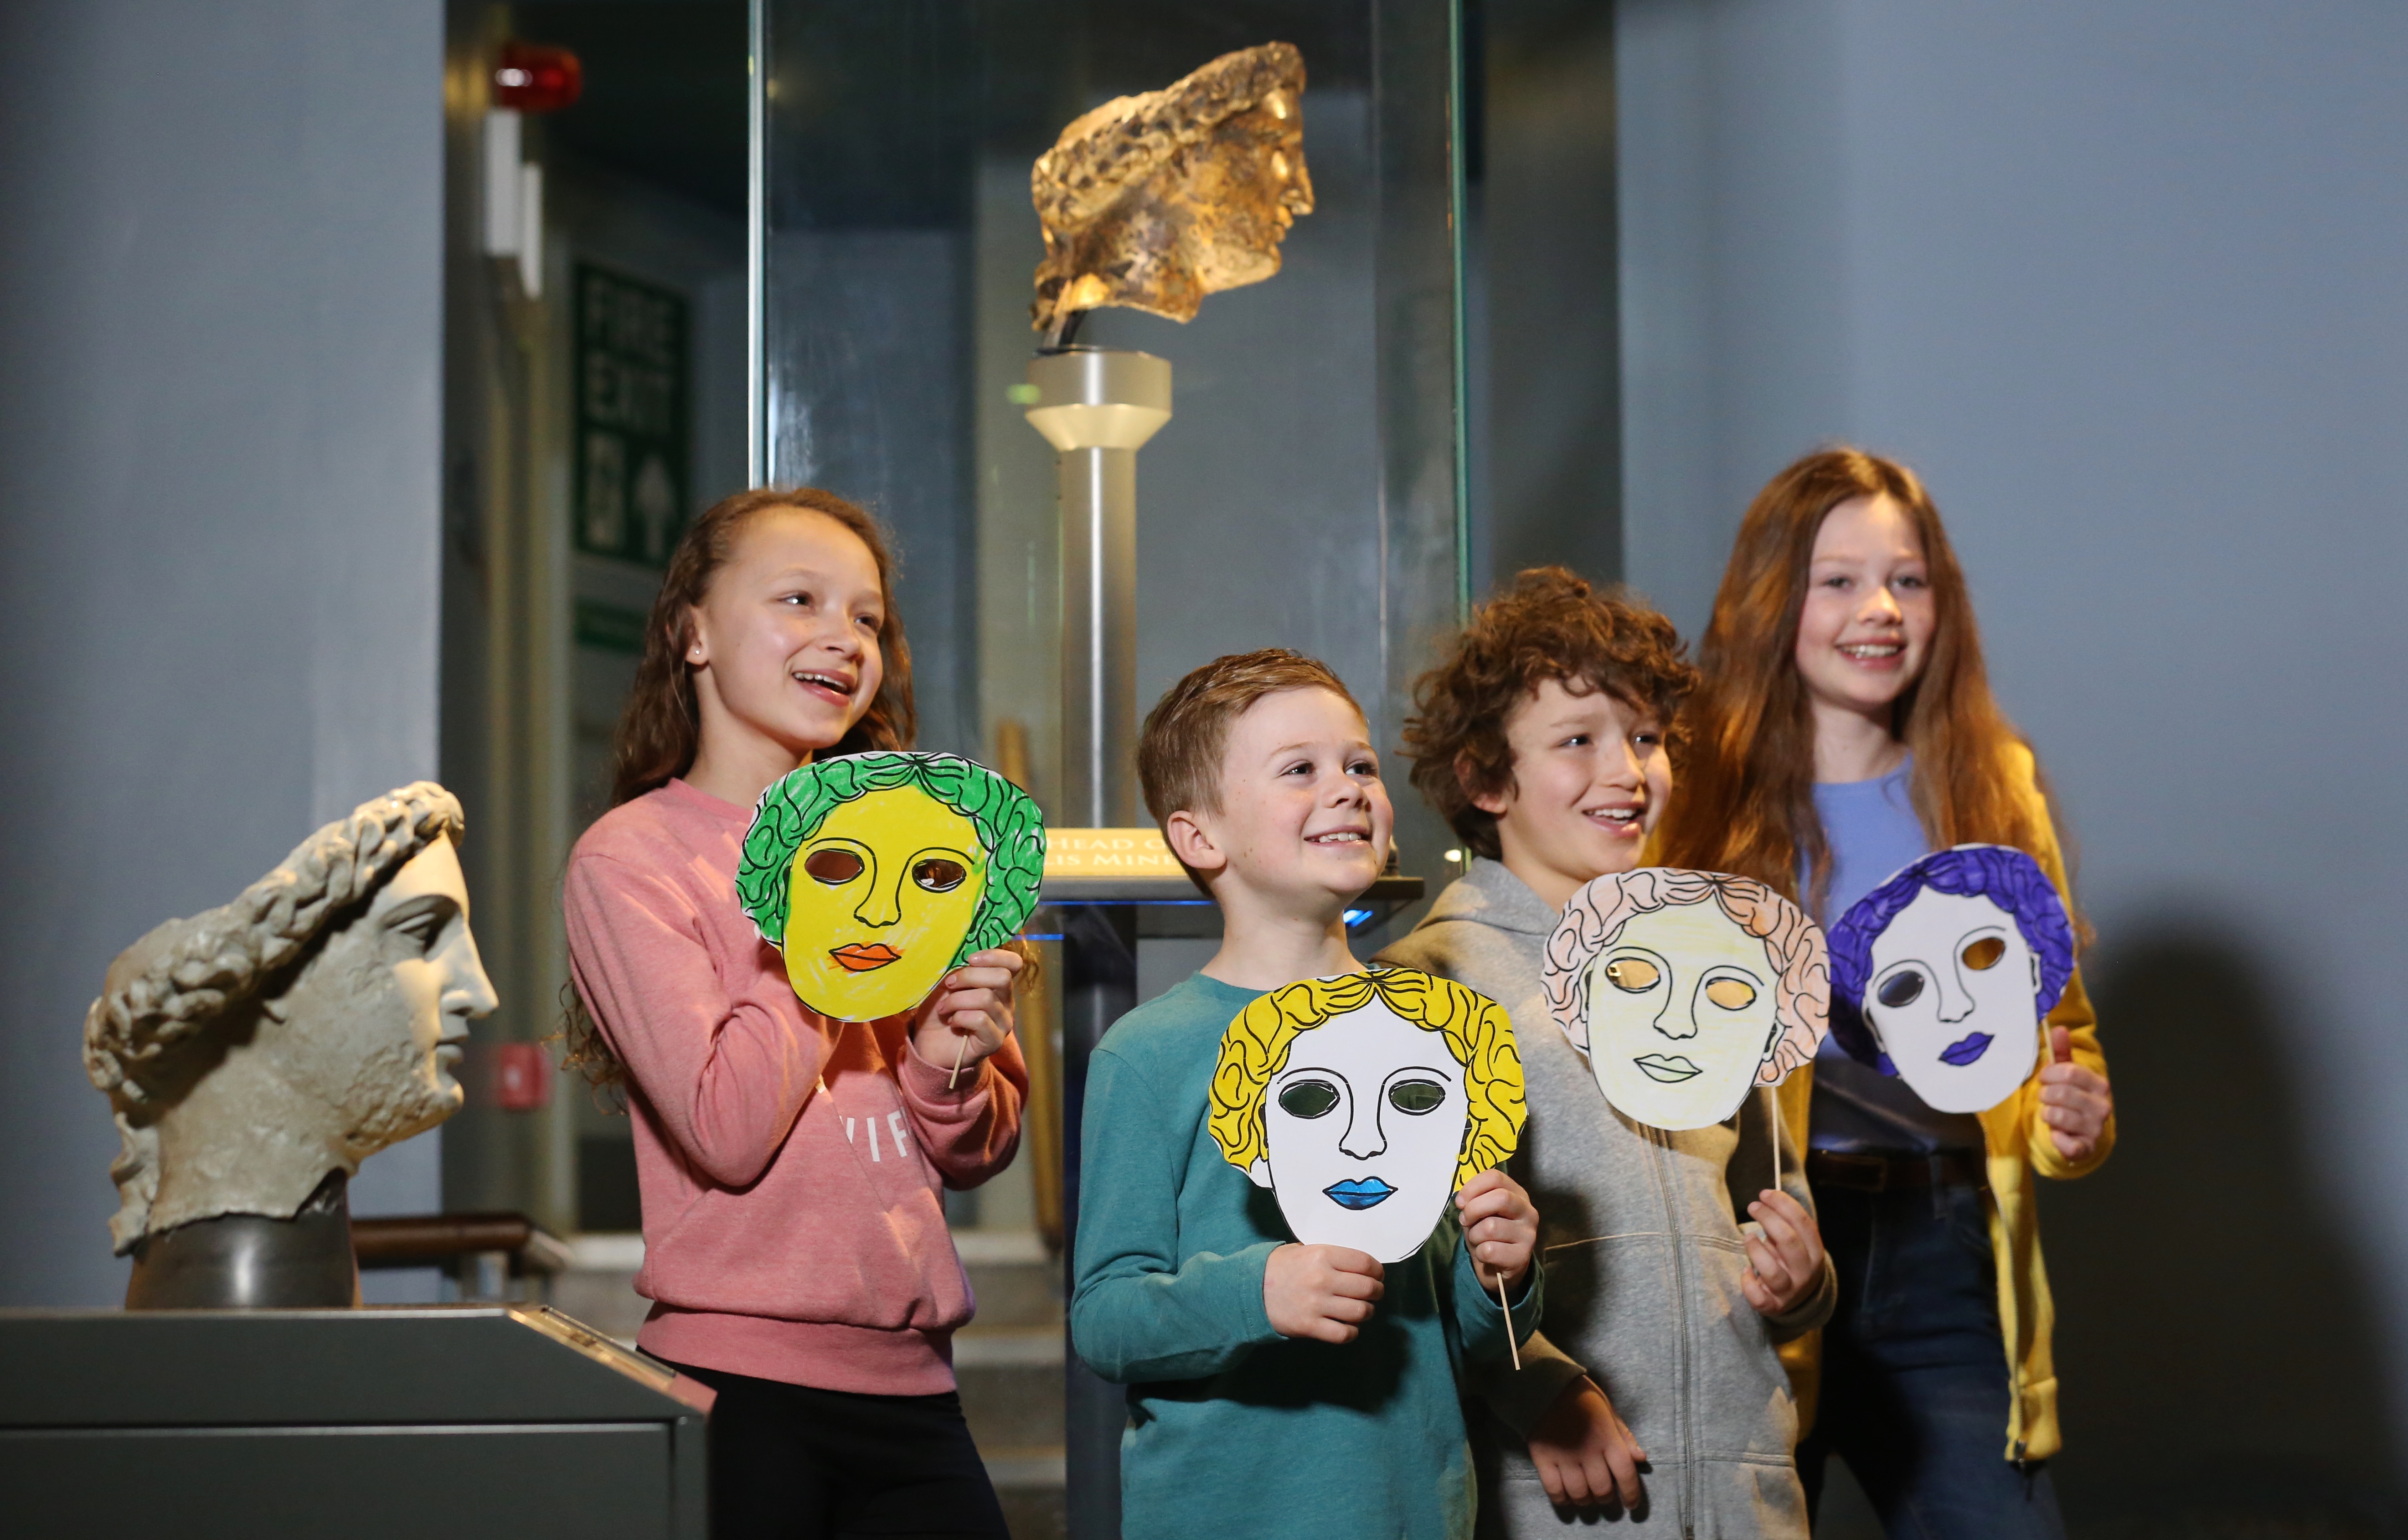 Image: Children standing in front of Minerva's head with masks they've made